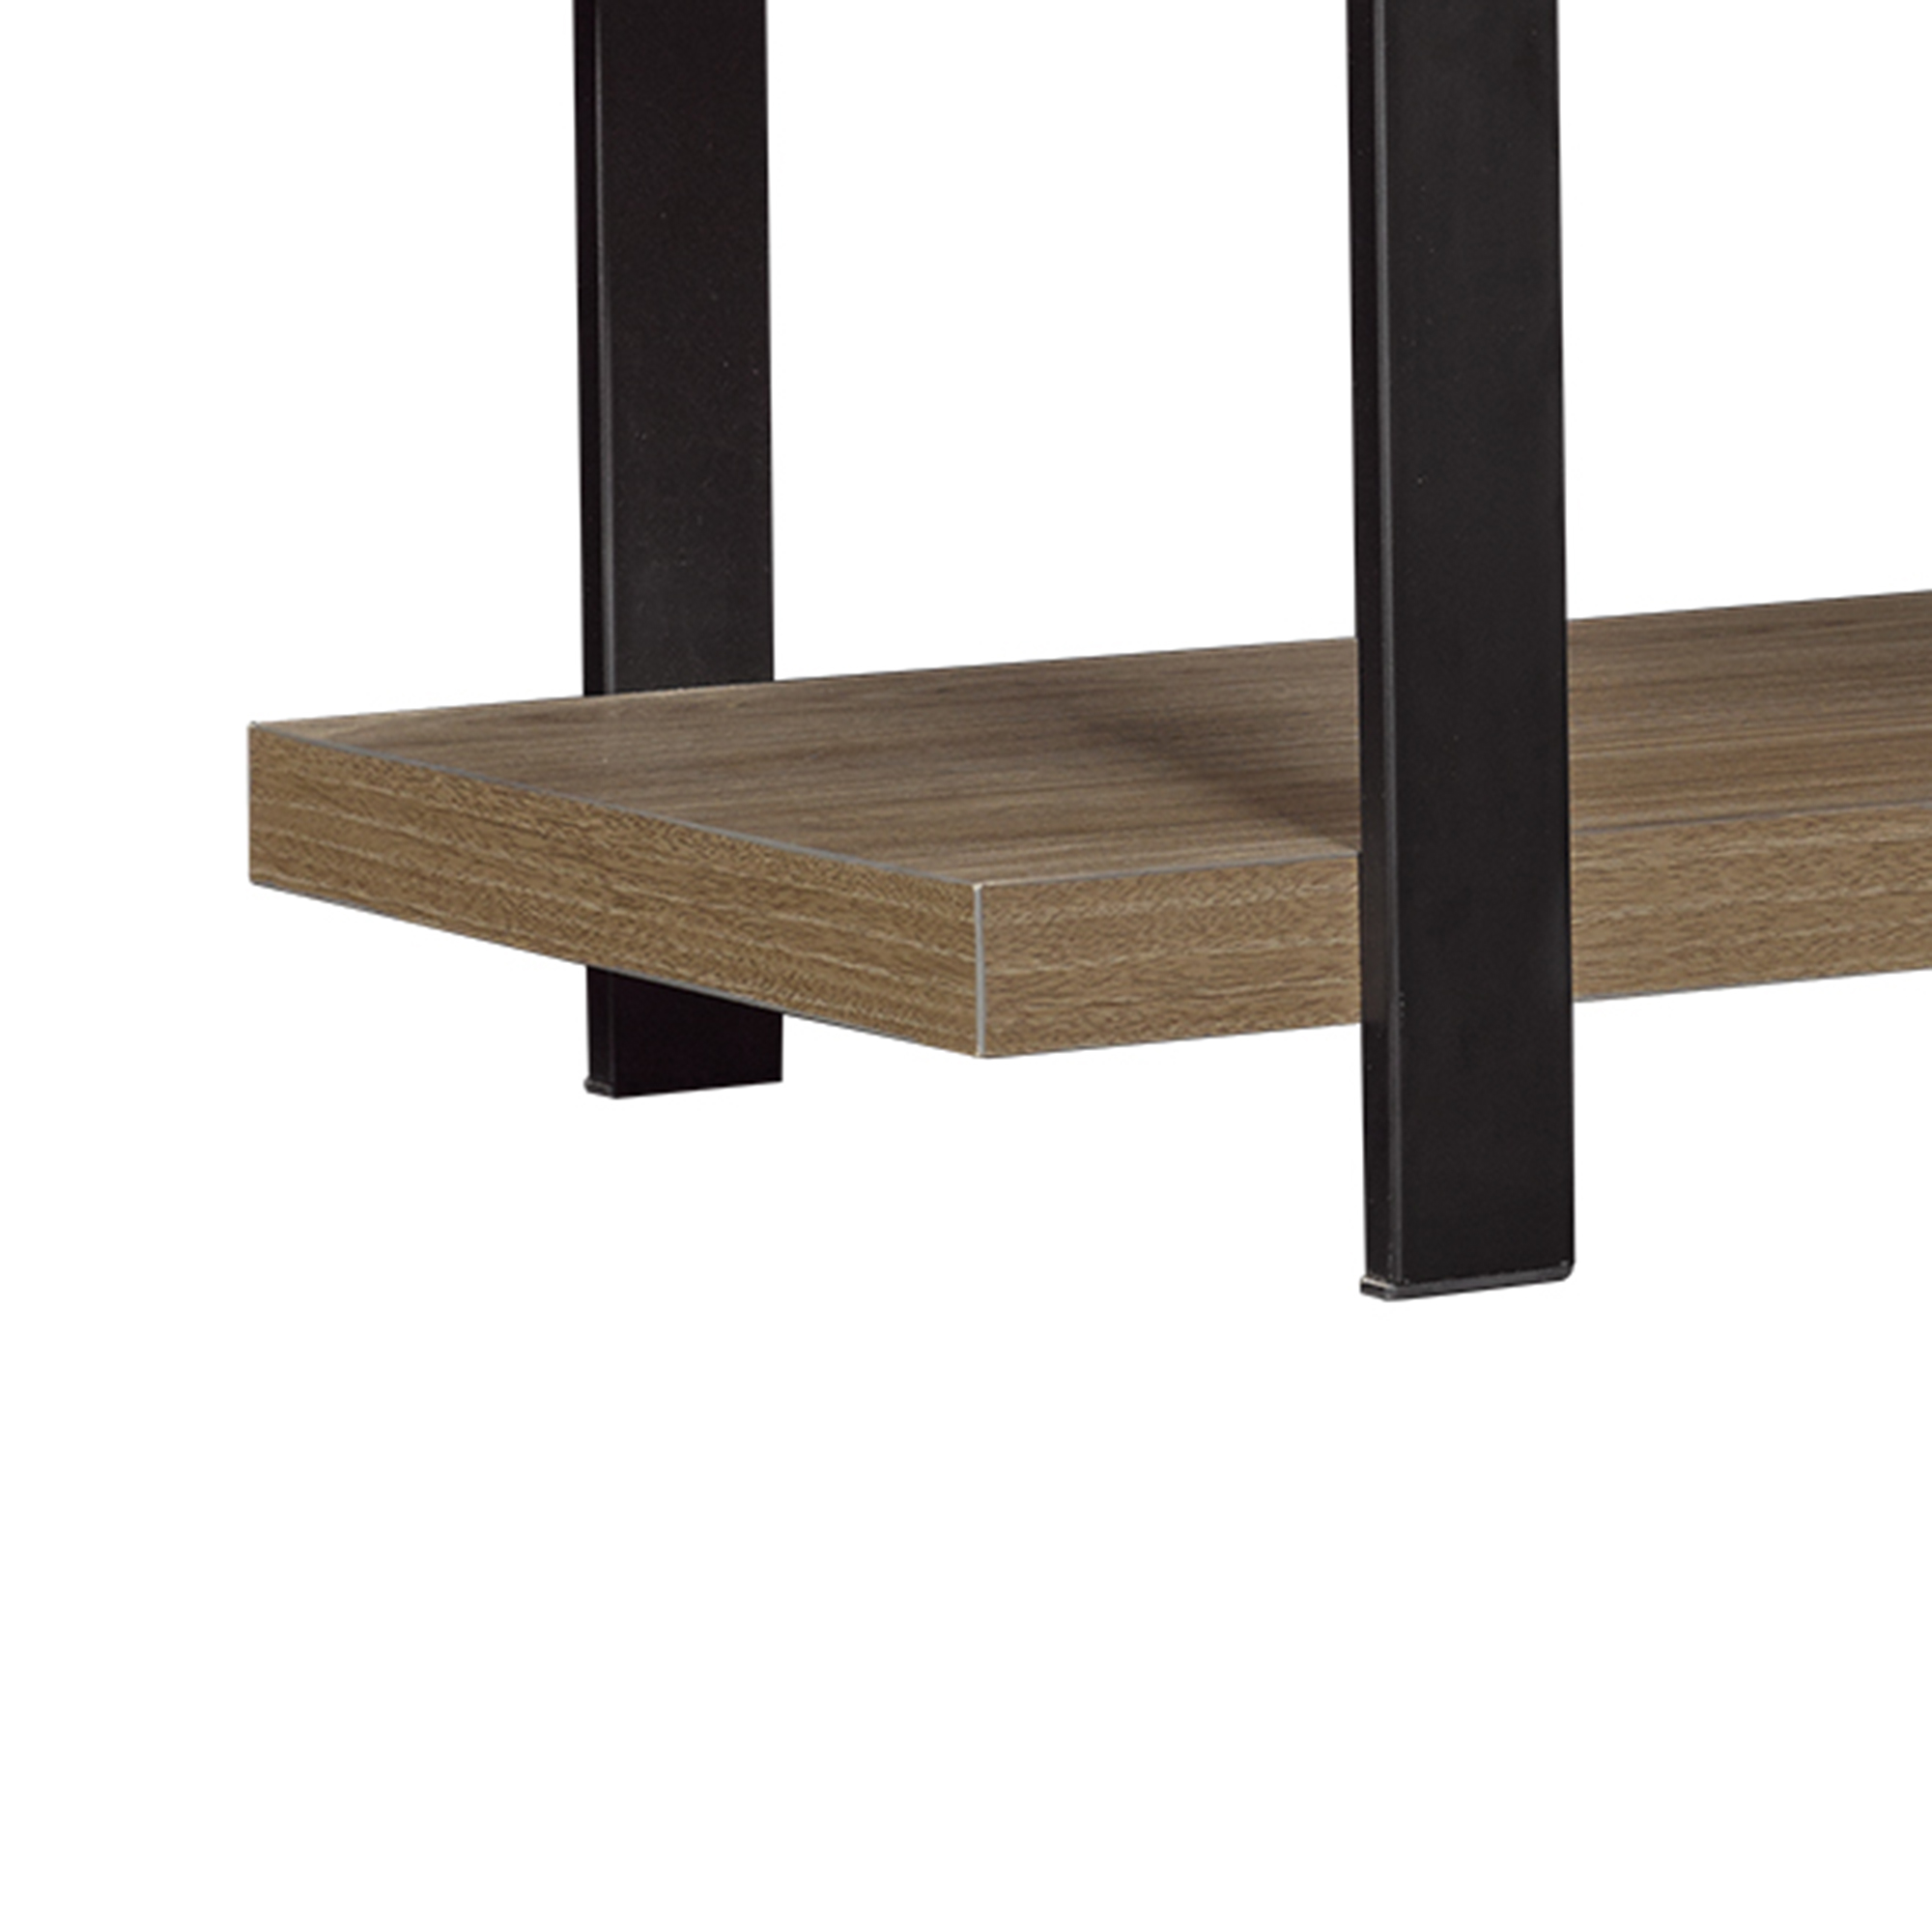 *DNP*Springtown TV Stand for TVs up to 55 inches Screen Size with S-Shape Open Shelves in Oyster Walnut - image 3 of 6